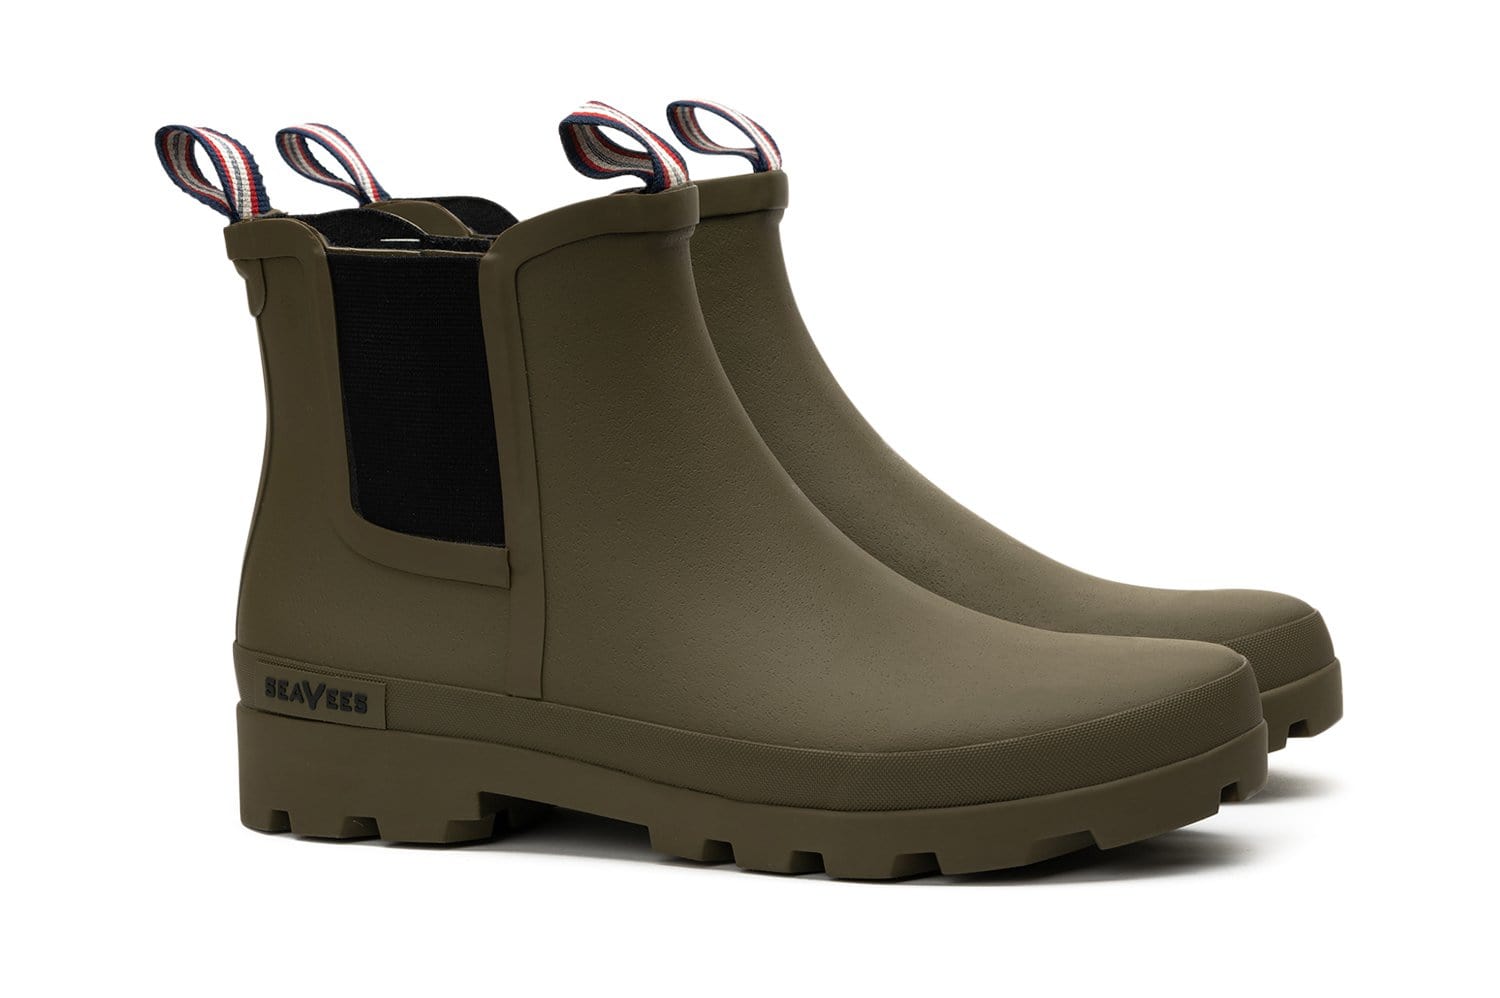 Angled view of Bolinas Off Shore Boot in Military Olive, showing side panels and tab.